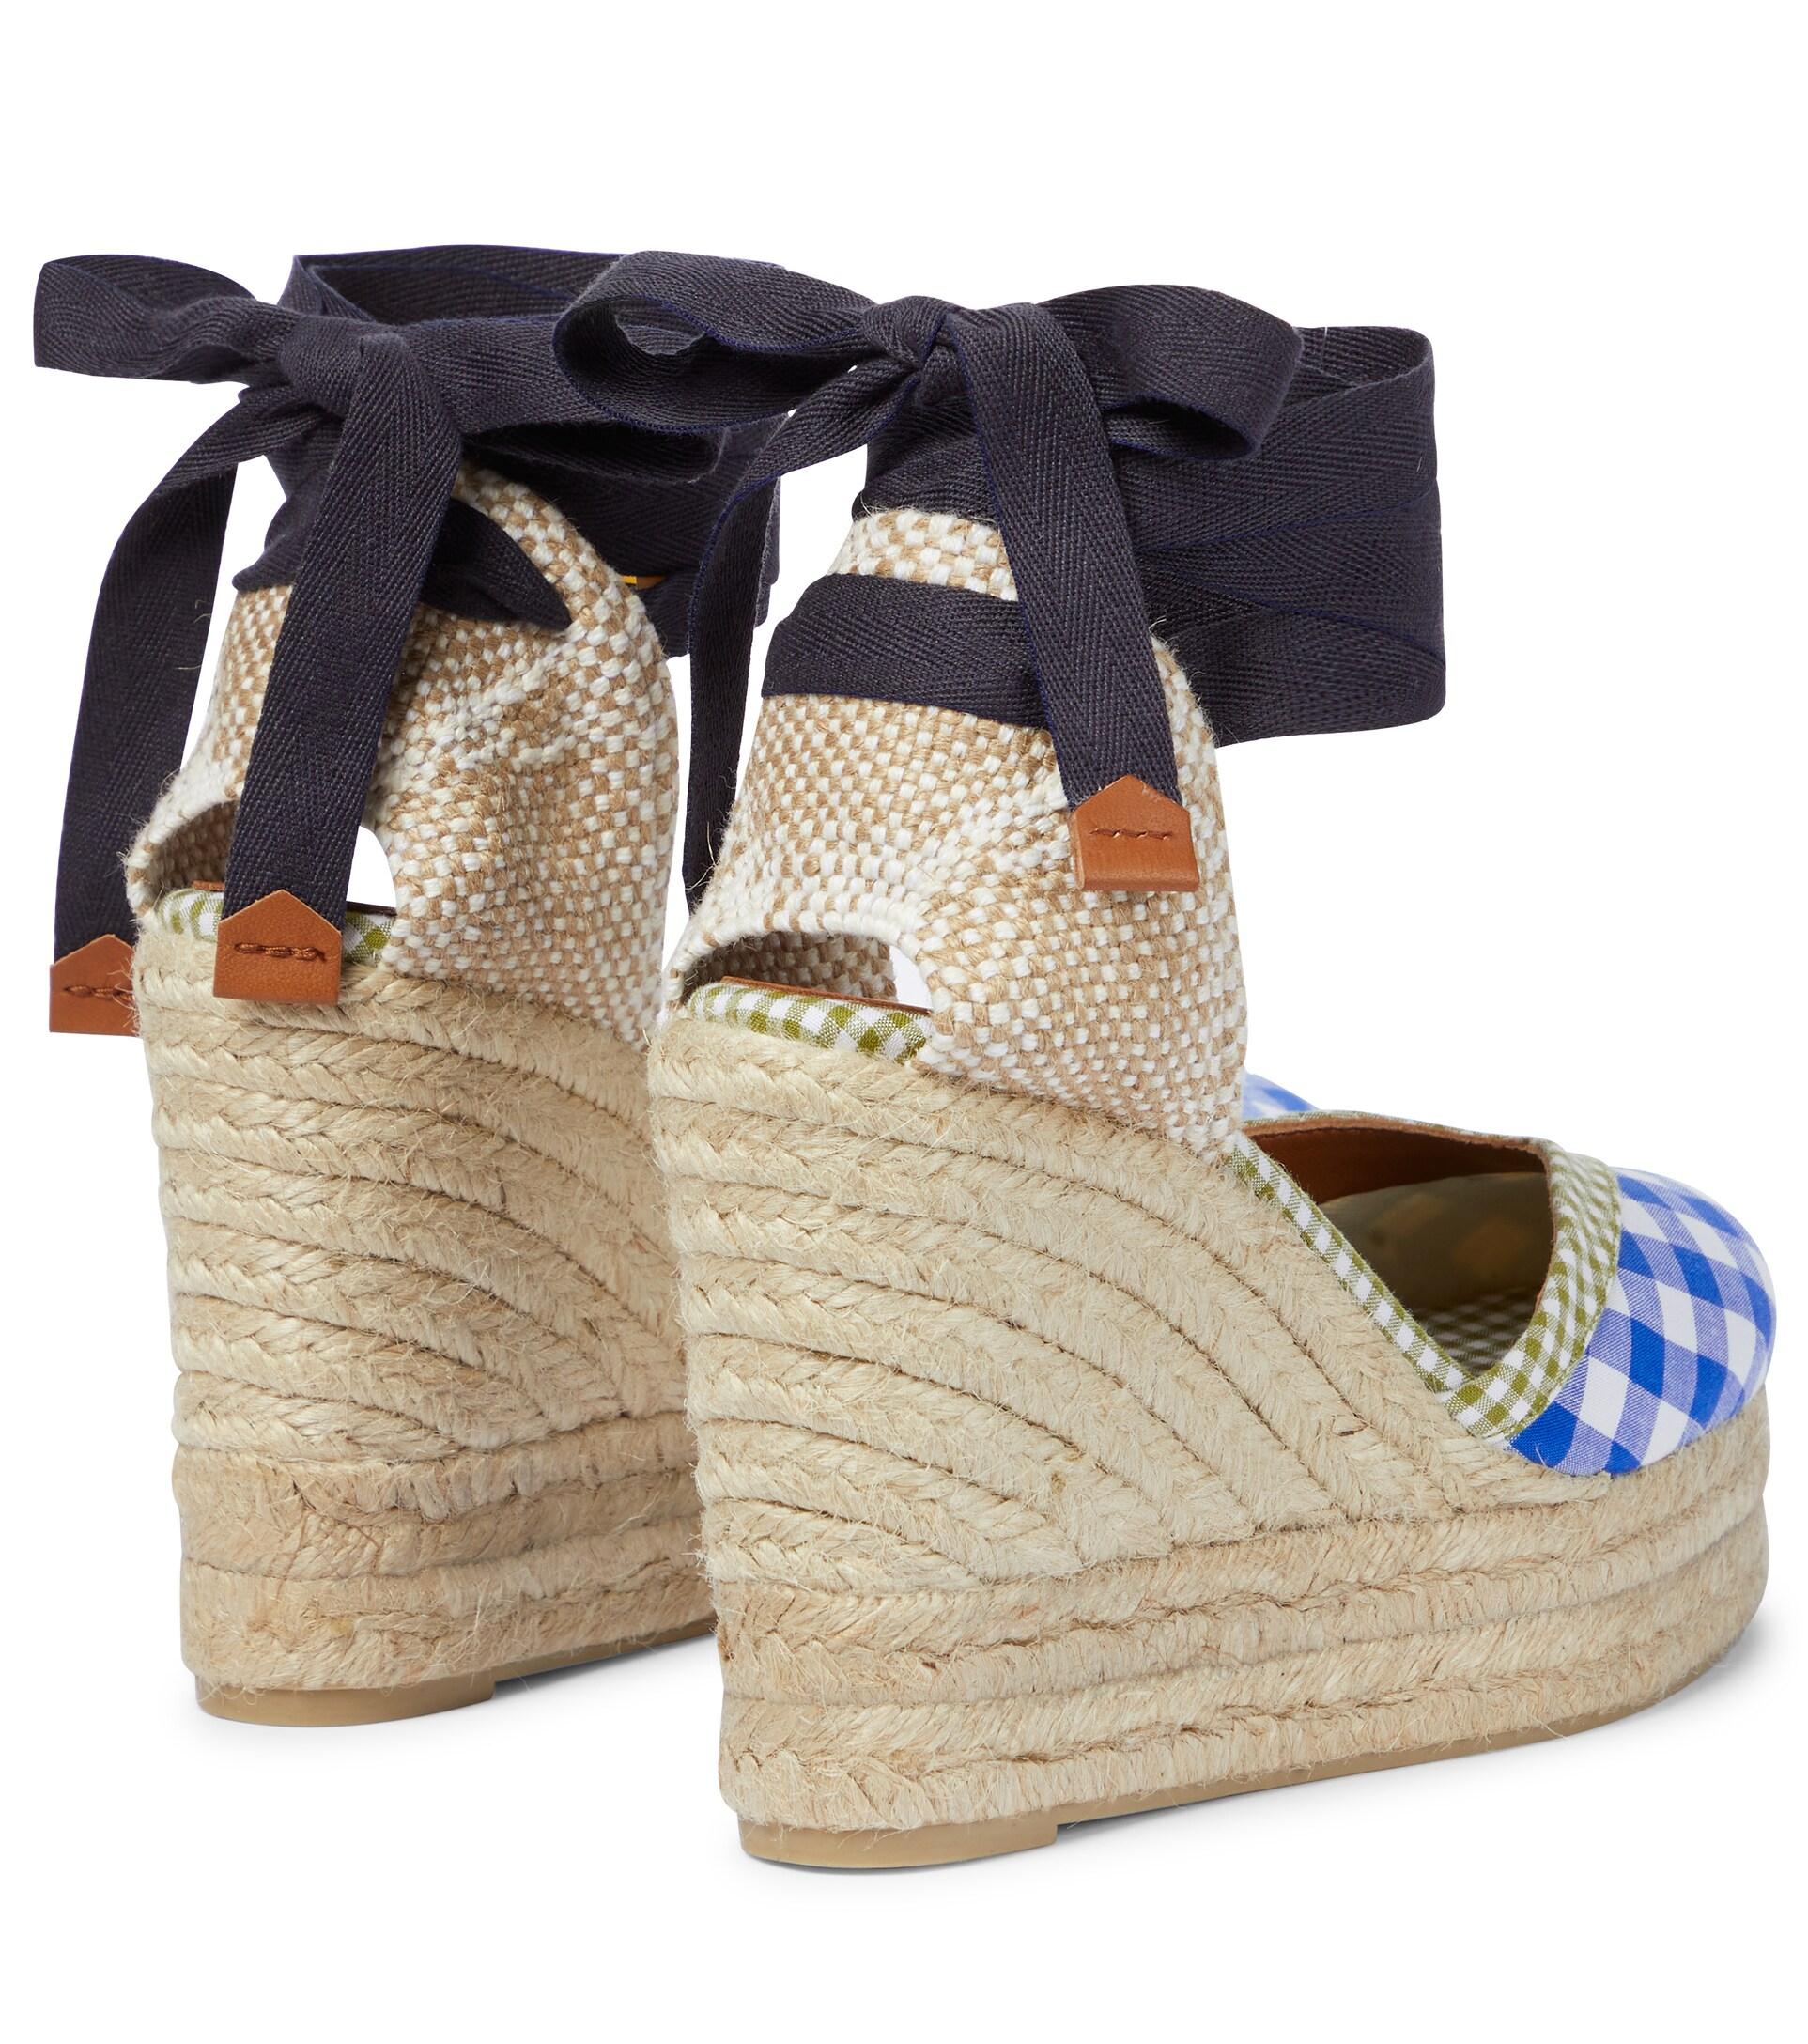 Castañer Rubber Cosmos Gingham Espadrille Wedges in Blue | Lyst